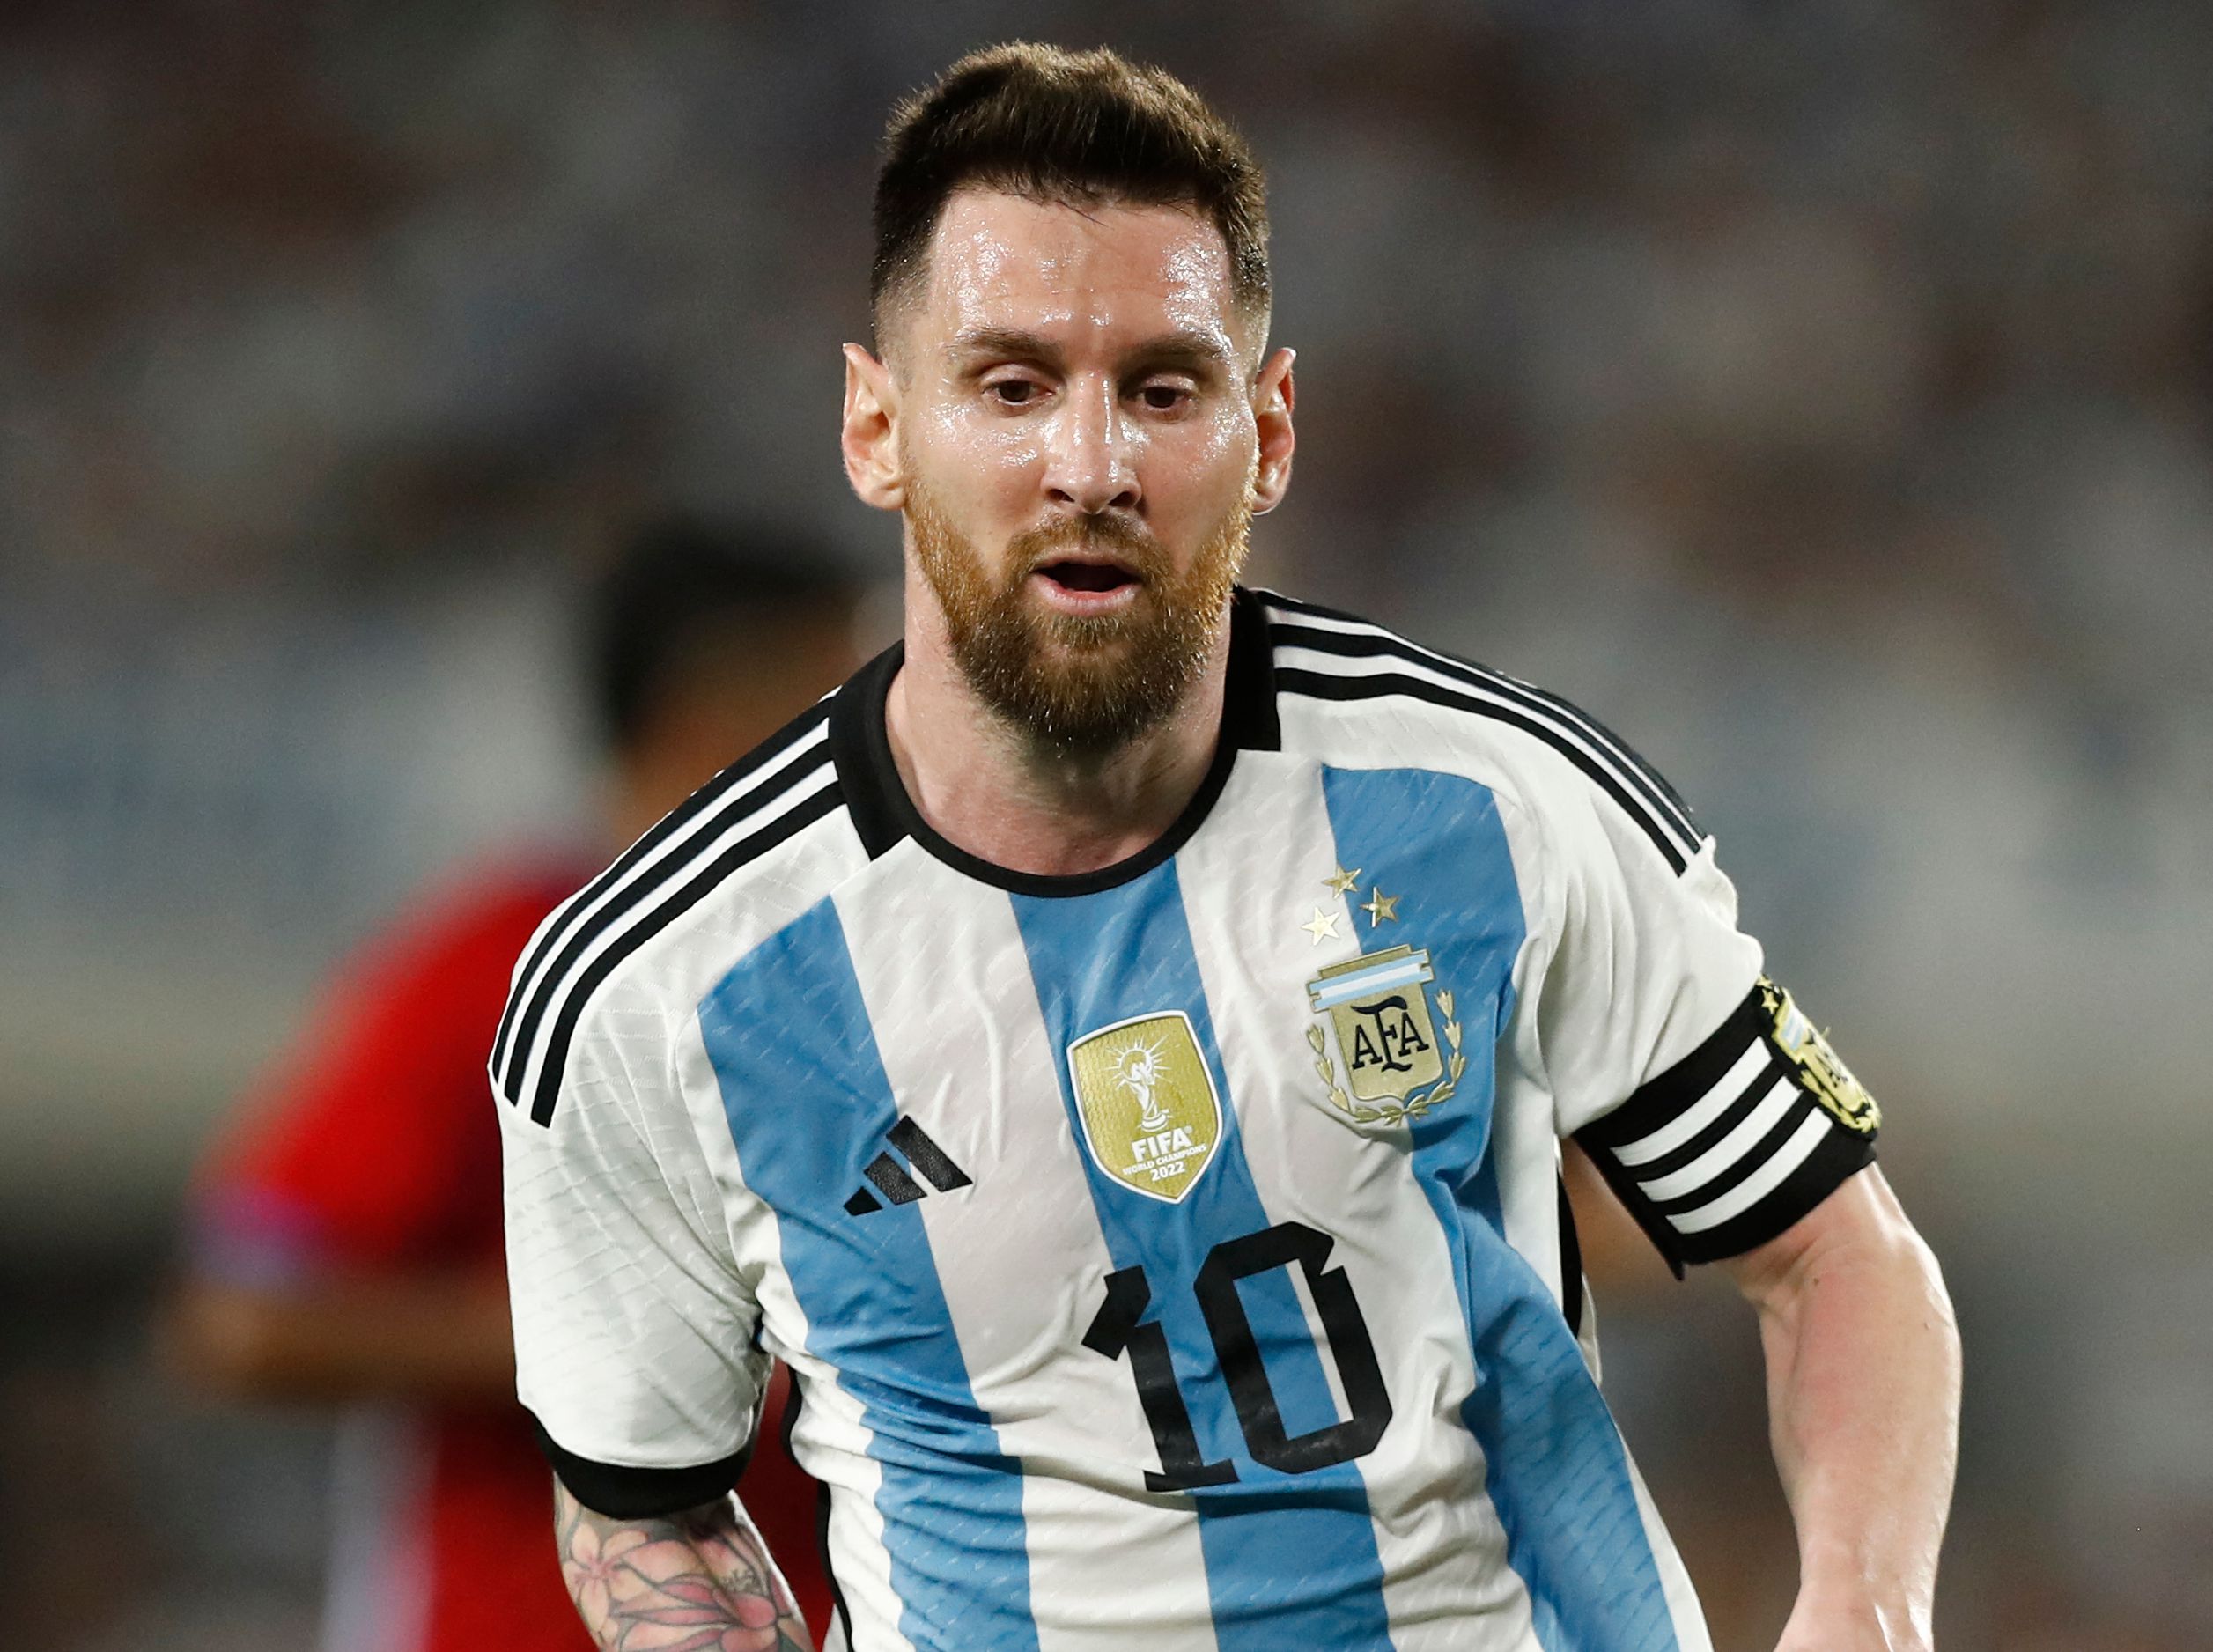 Lionel Messi's knees: The reason they look so bizarre has been explained